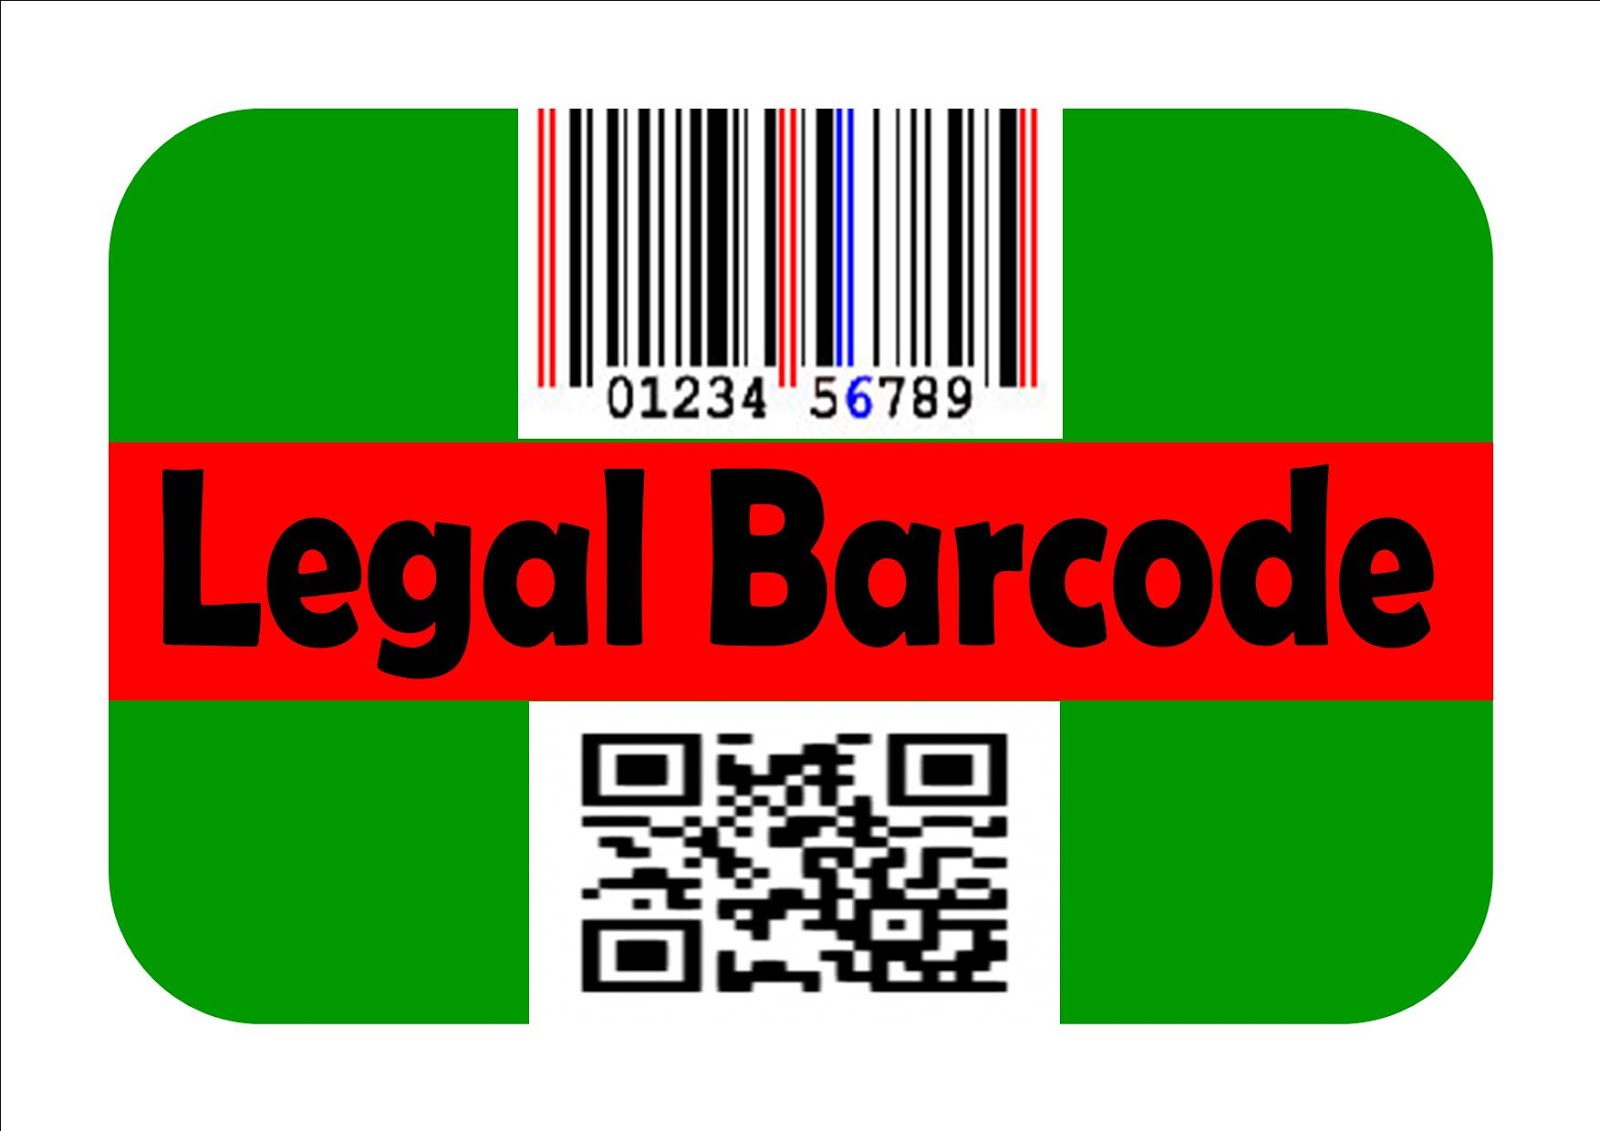 Legal Barcode